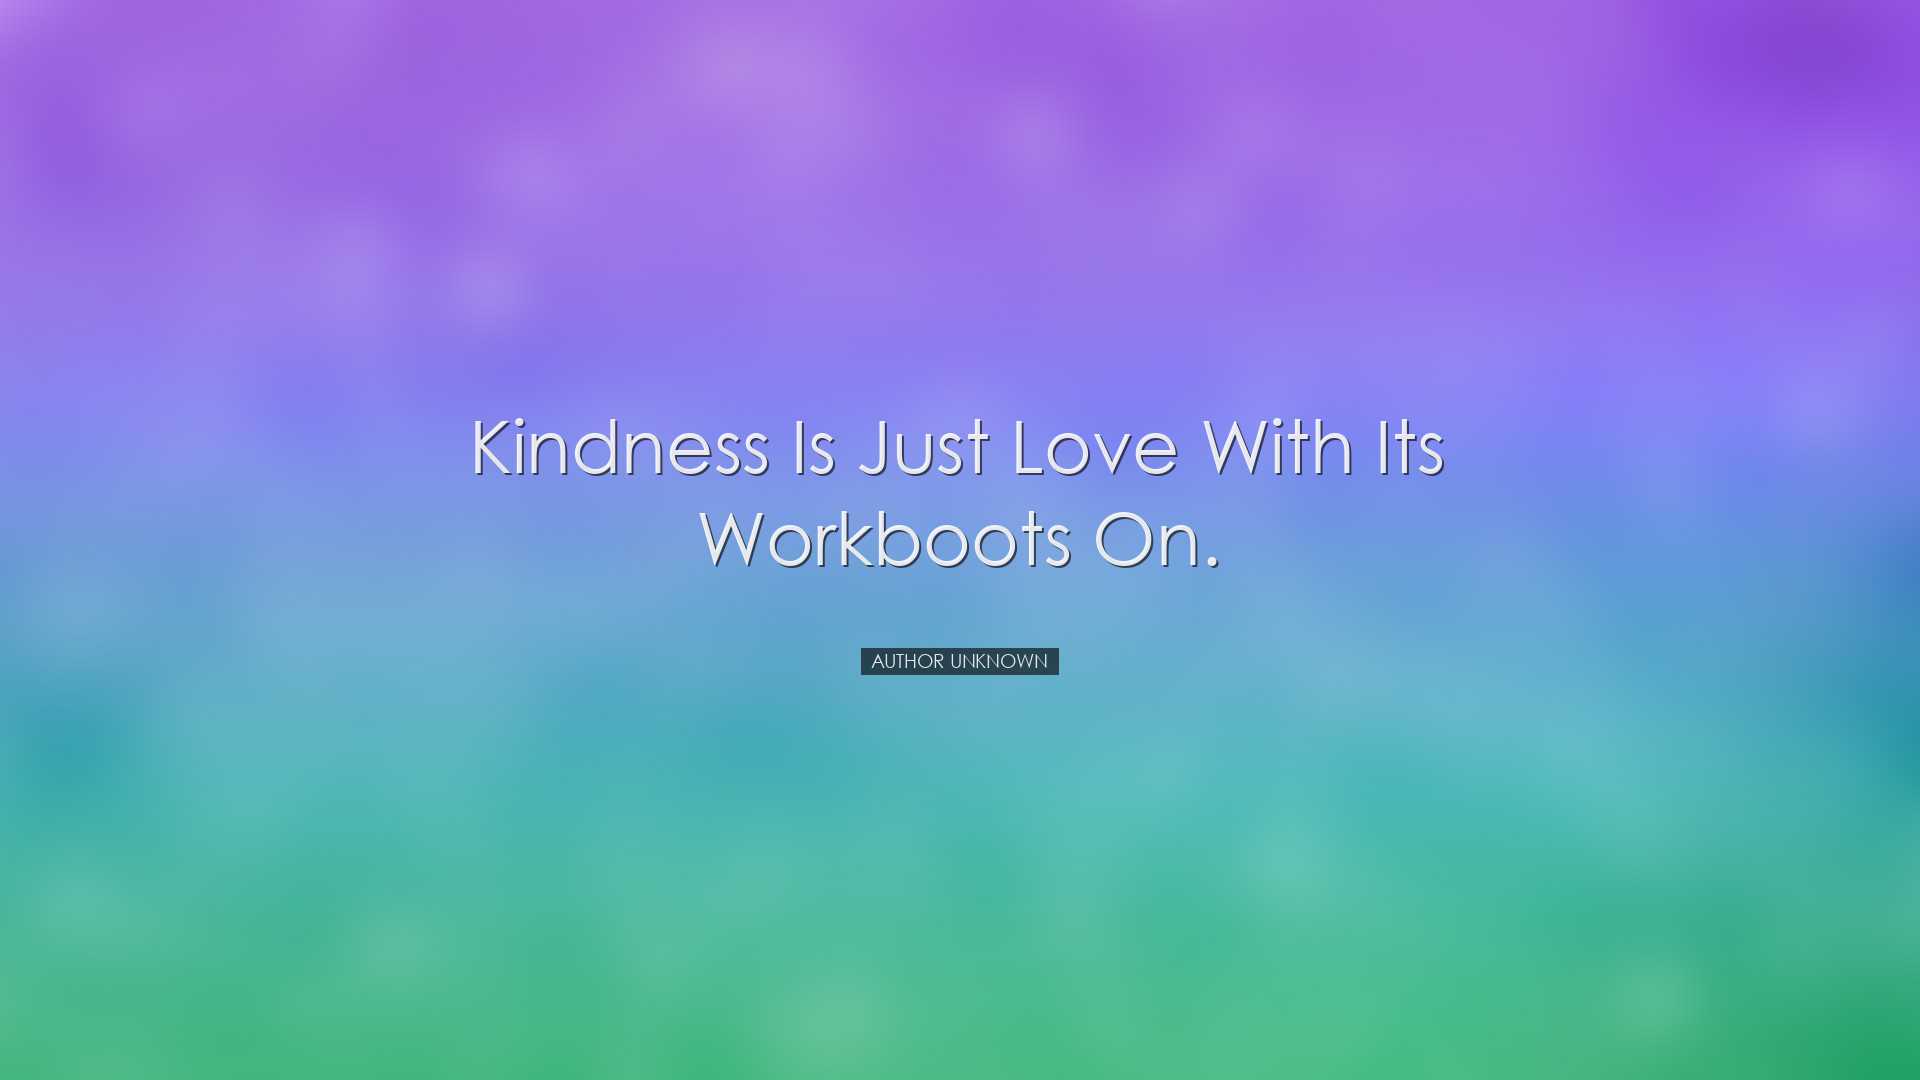 Kindness is just love with its workboots on. - Author Unknown